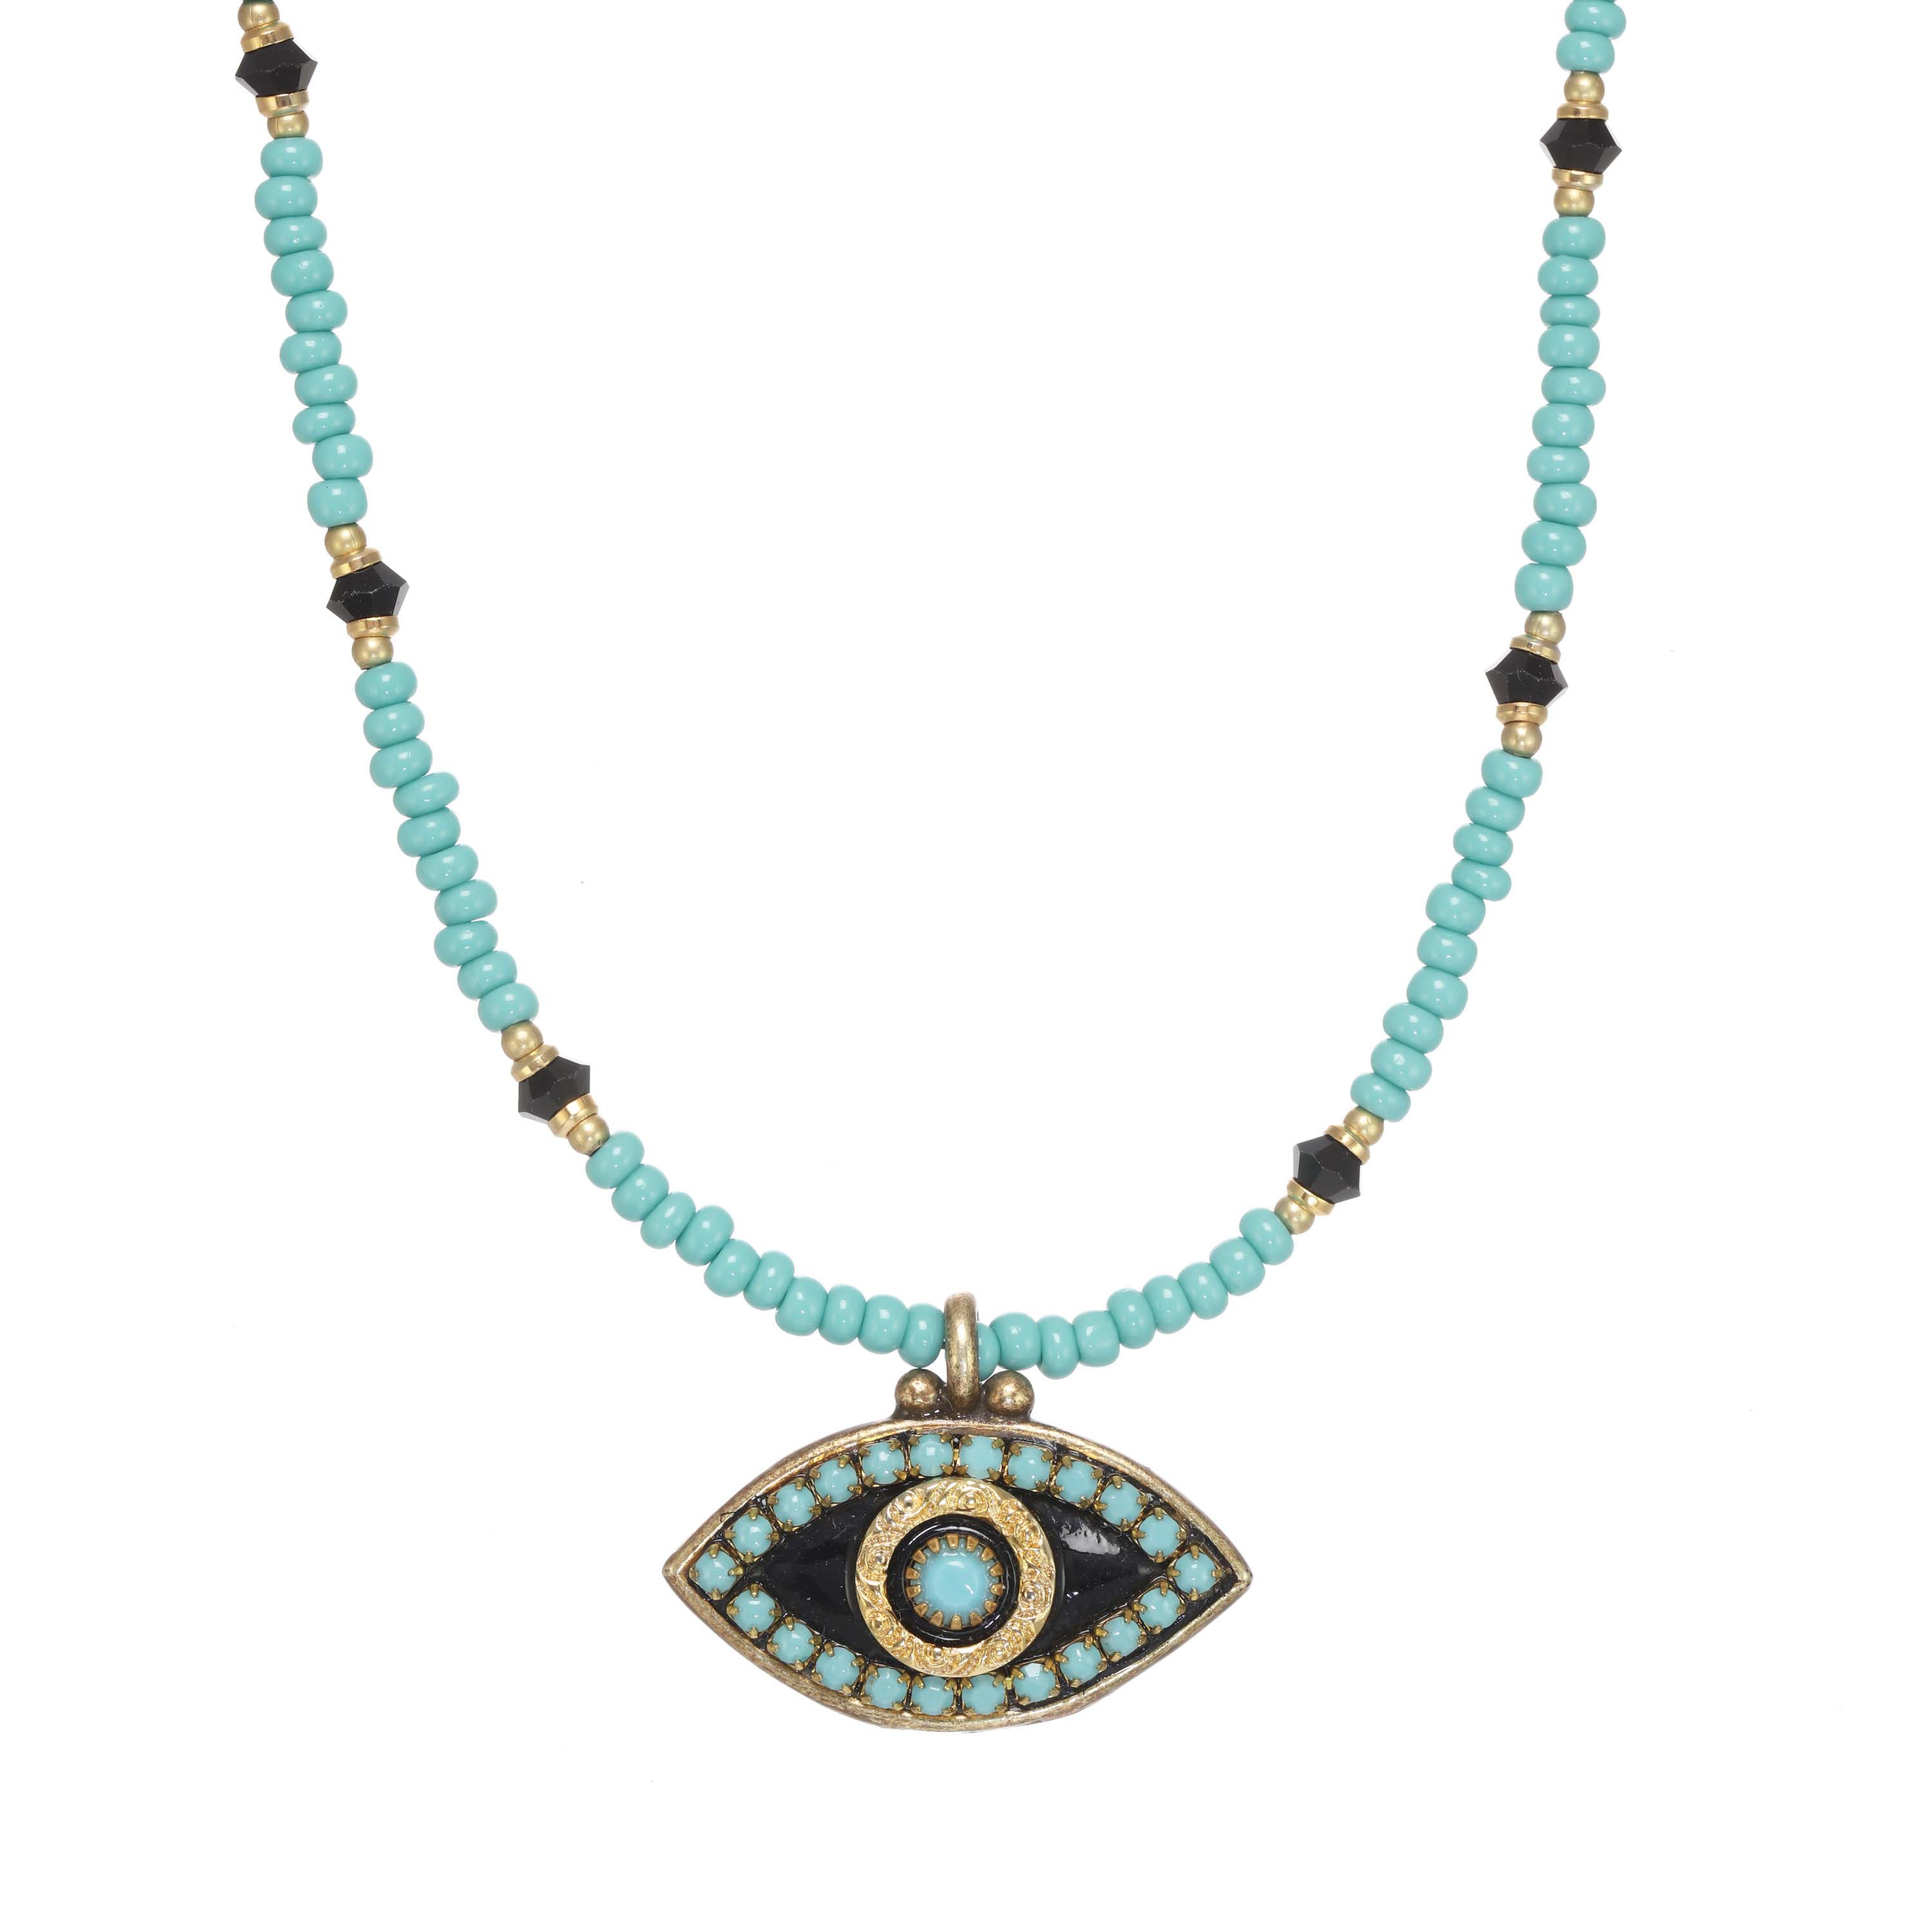 Turquoise and Black Evil Eye Necklace